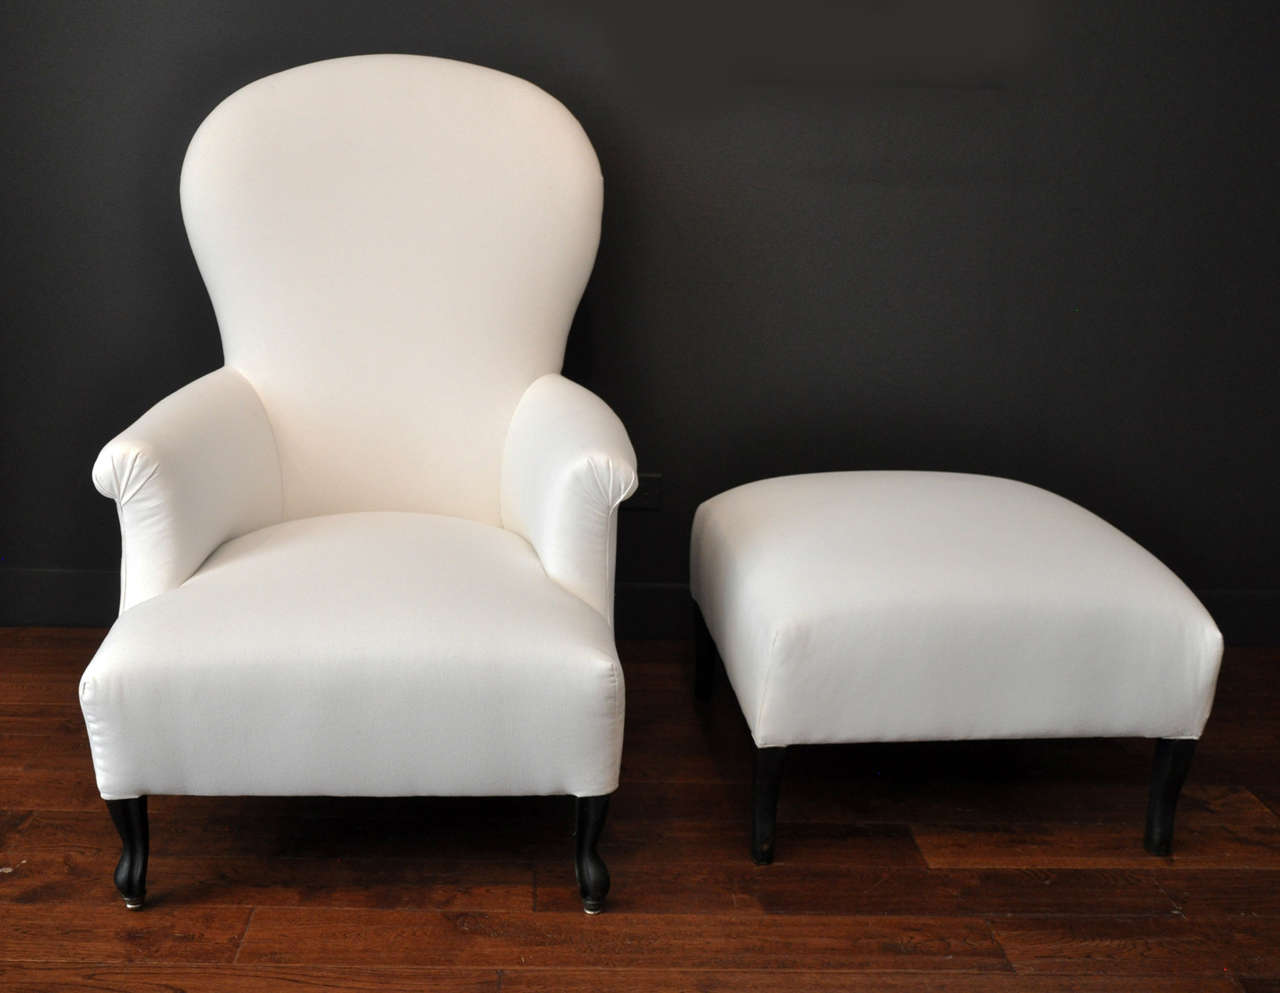 This Napoleon Style chair and ottoman create a cool and unusual chaise when pushed together.<br />
Dimensions below are for the chair portion<br />
Ottoman -17H x 25 x 24